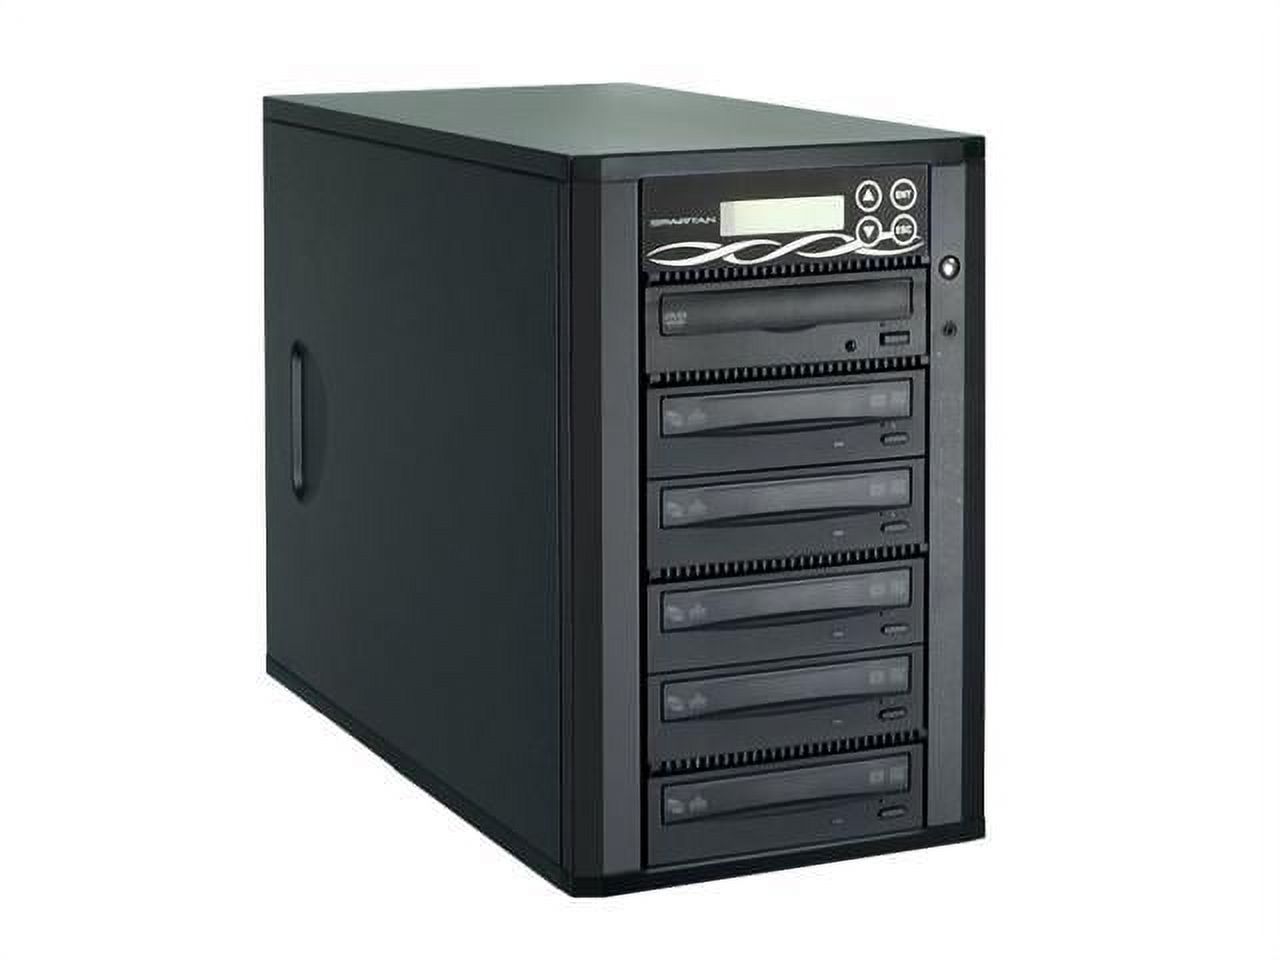 EZ Dupe 1 to 5 DVD Duplicator - Gold Series Disc to Disc Copier (D05-SSP) - image 1 of 3